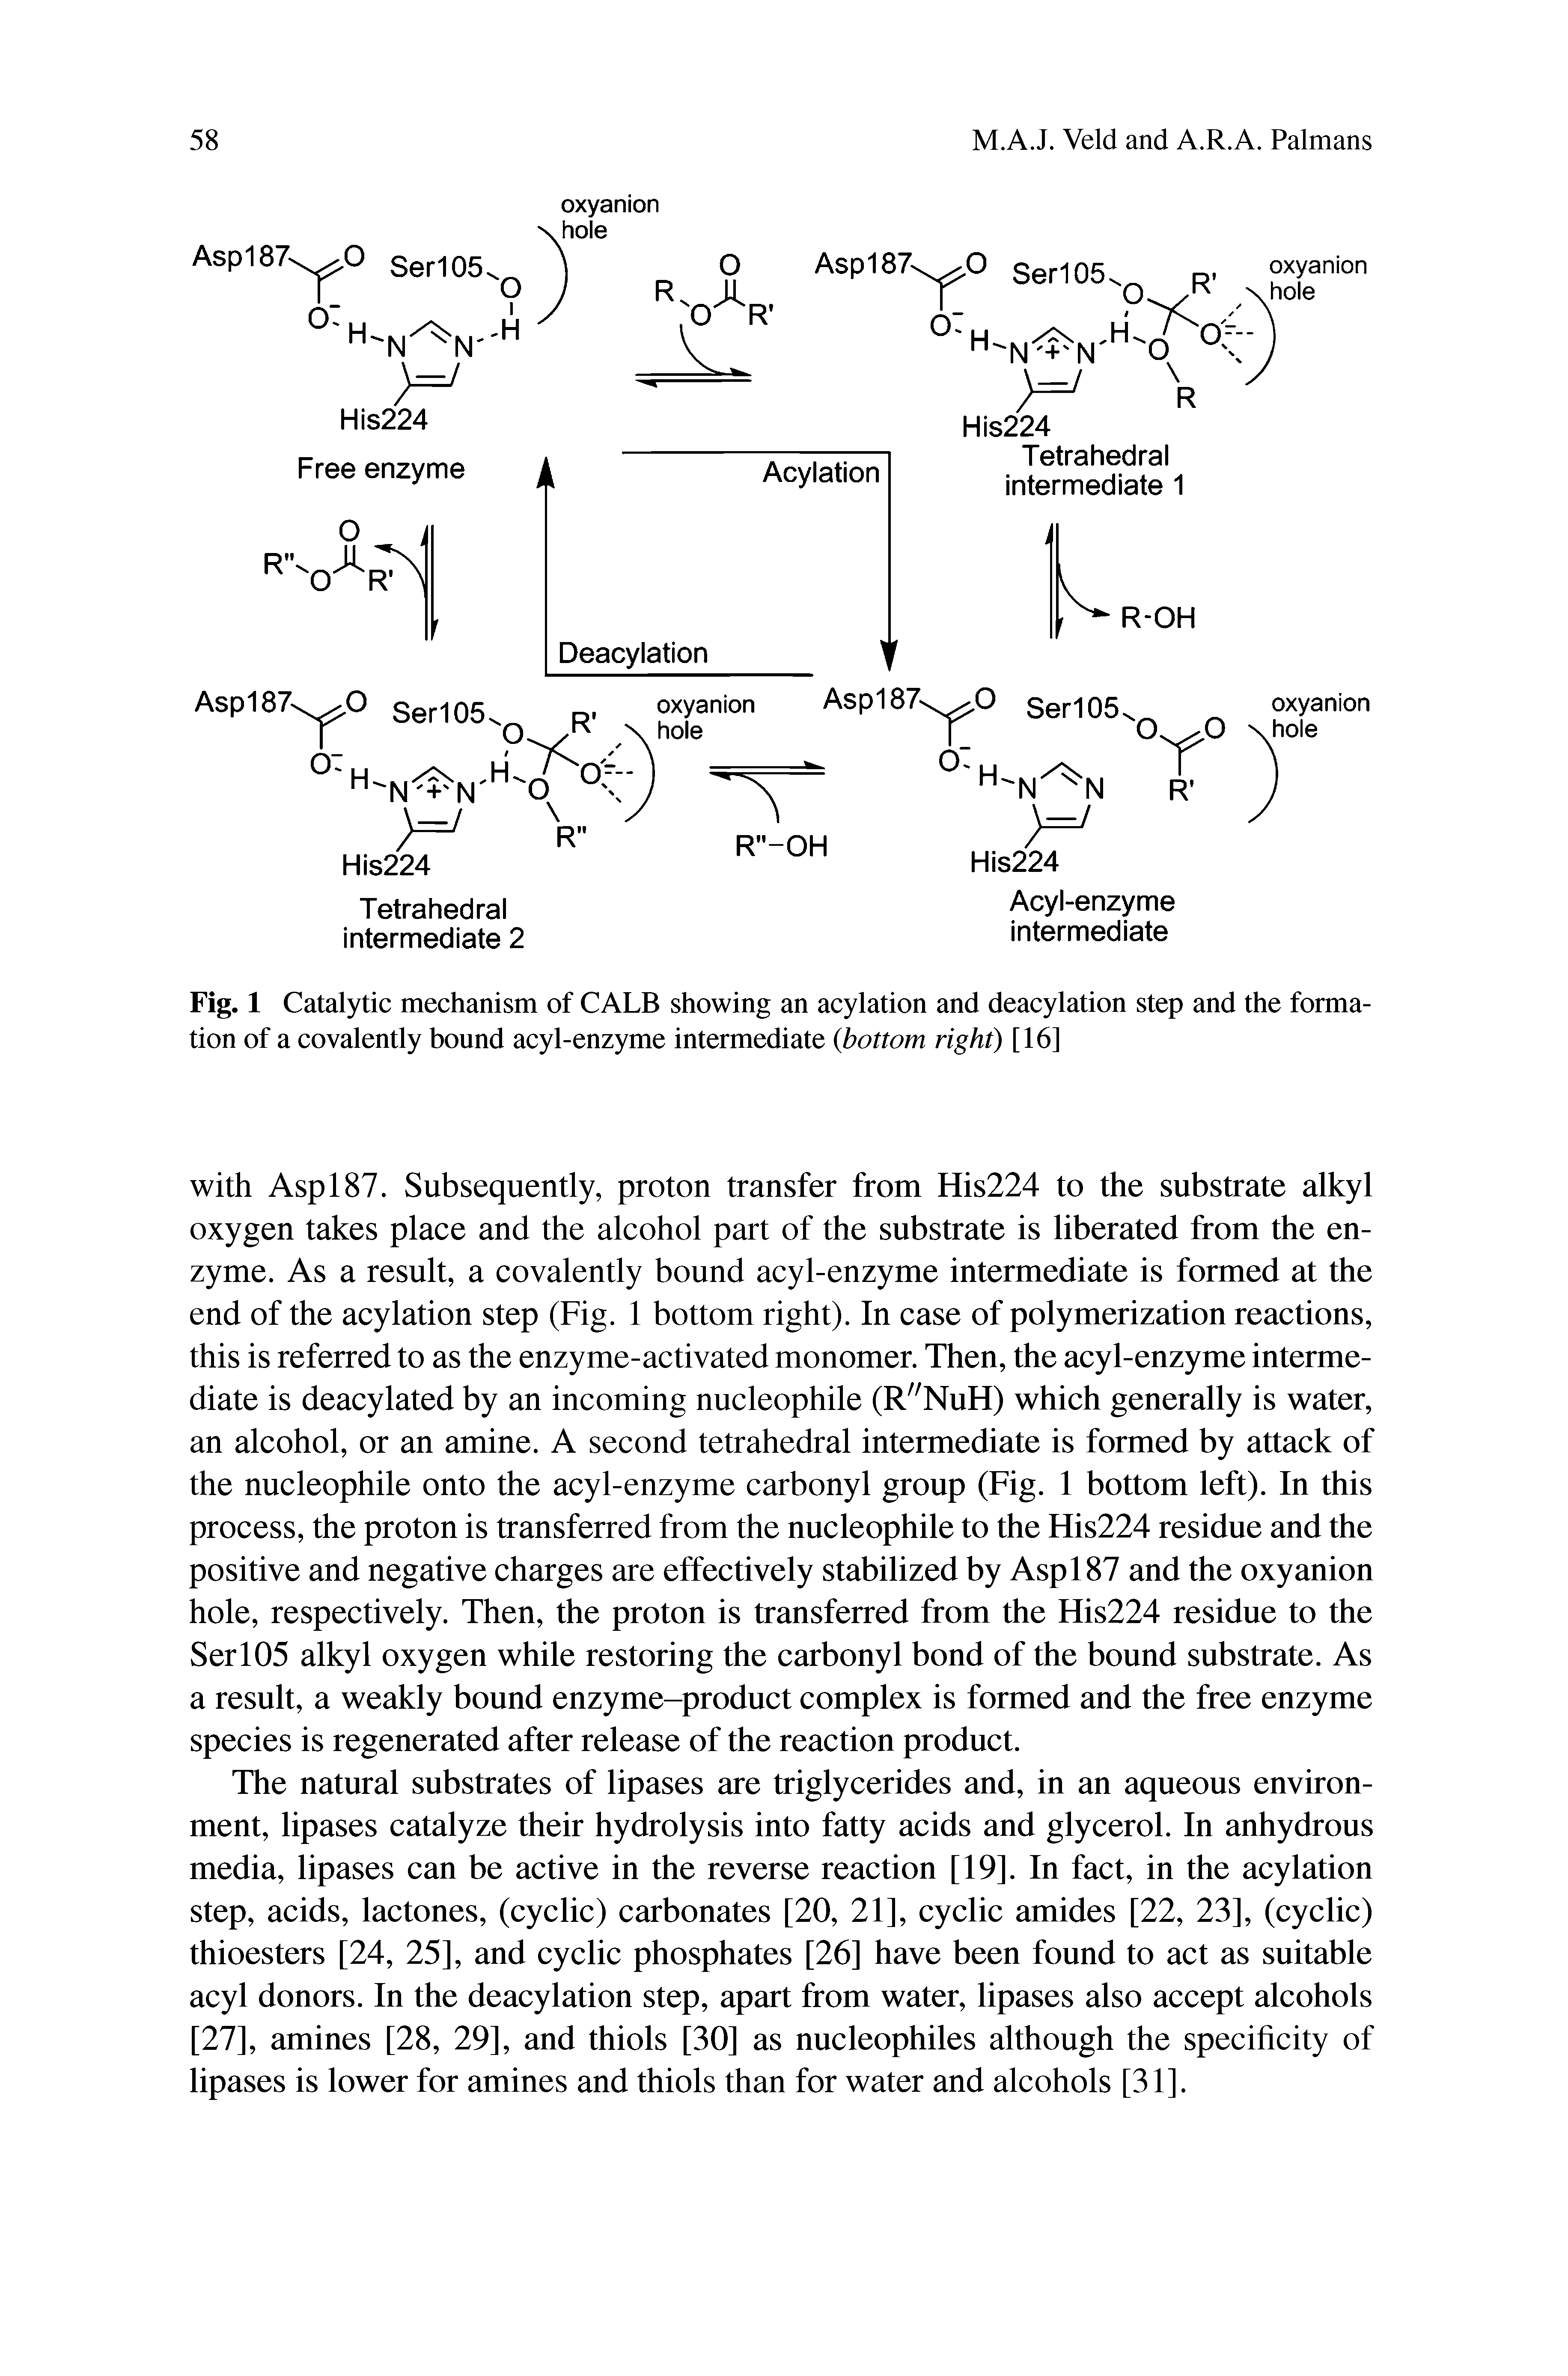 Fig. 1 Catalytic mechanism of CALB showing an acylation and deacylation step and the formation of a covalently bound acyl-enzyme intermediate bottom right) [16]...